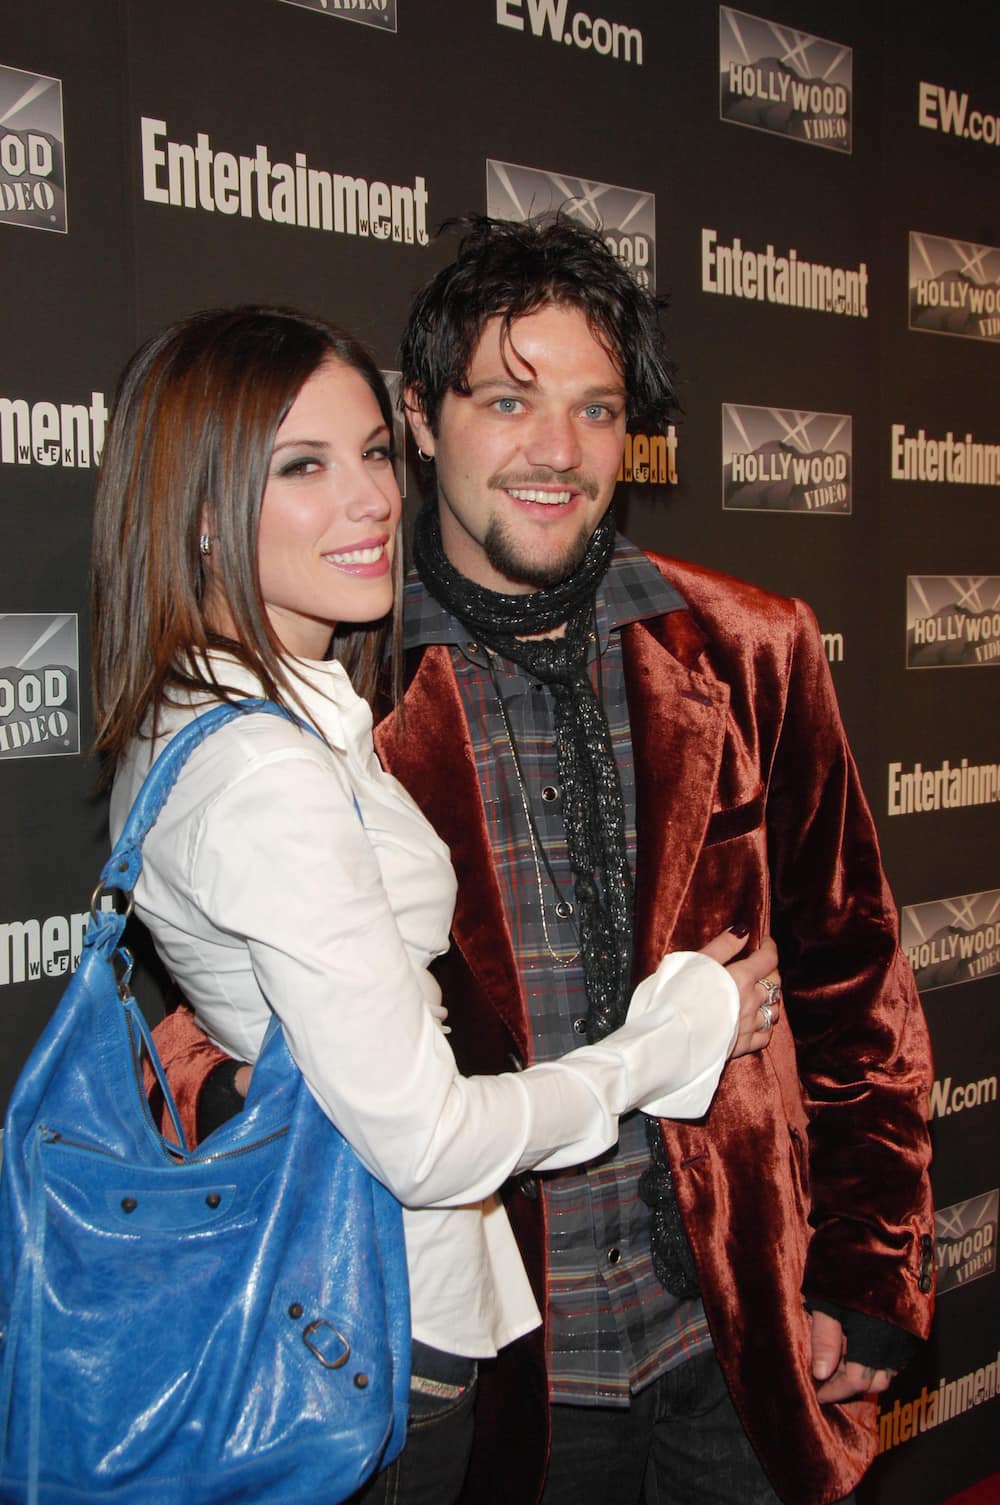 Miss Rothstein wearing a white top with her ex-husband, Bam Margera